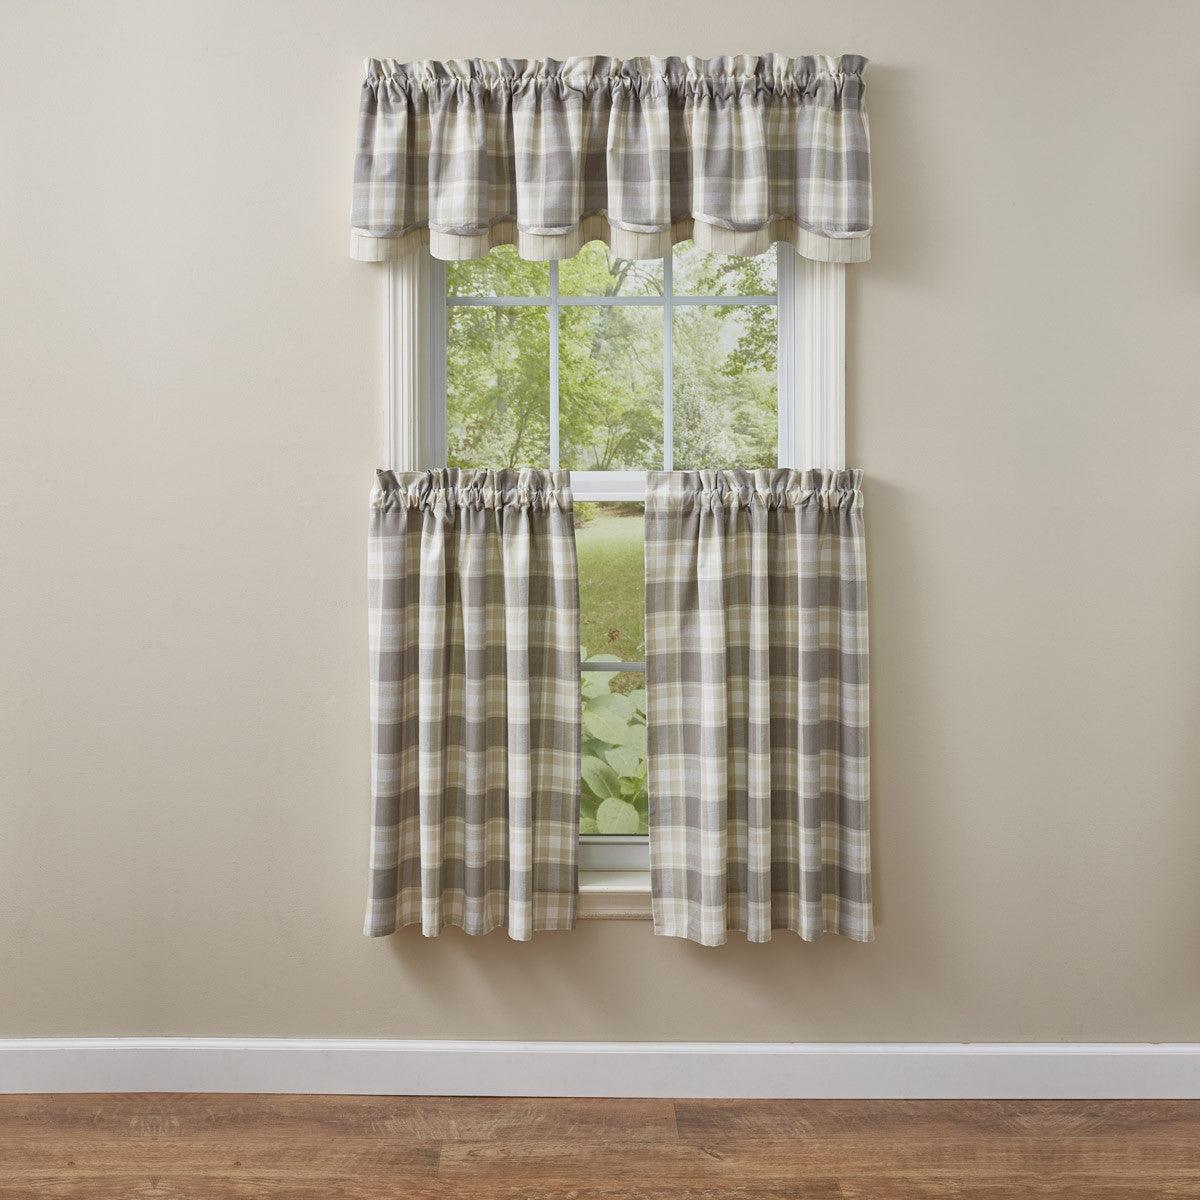 Weathered Oak Valance - Lined Layered Park Designs - The Fox Decor